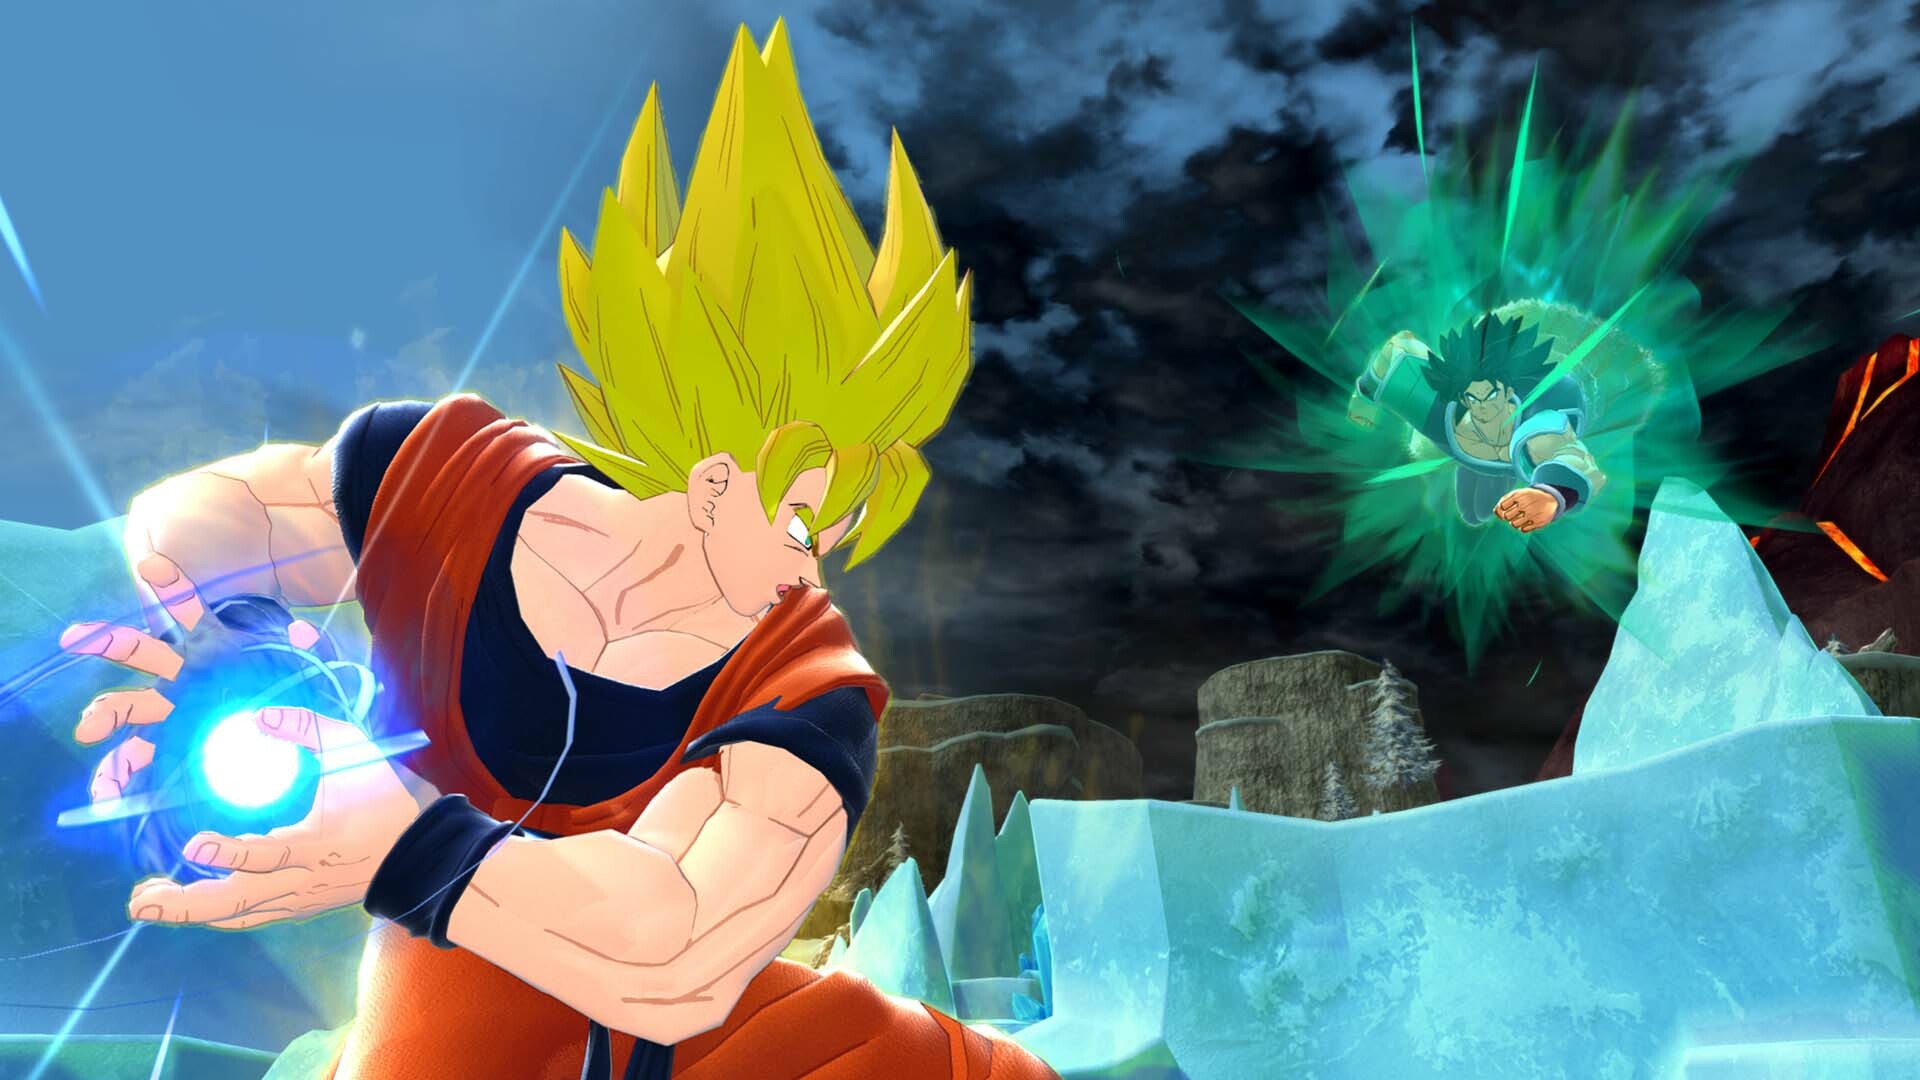 DRAGON BALL: THE BREAKERS Mobile - How to play on an Android or iOS phone?  - Games Manuals